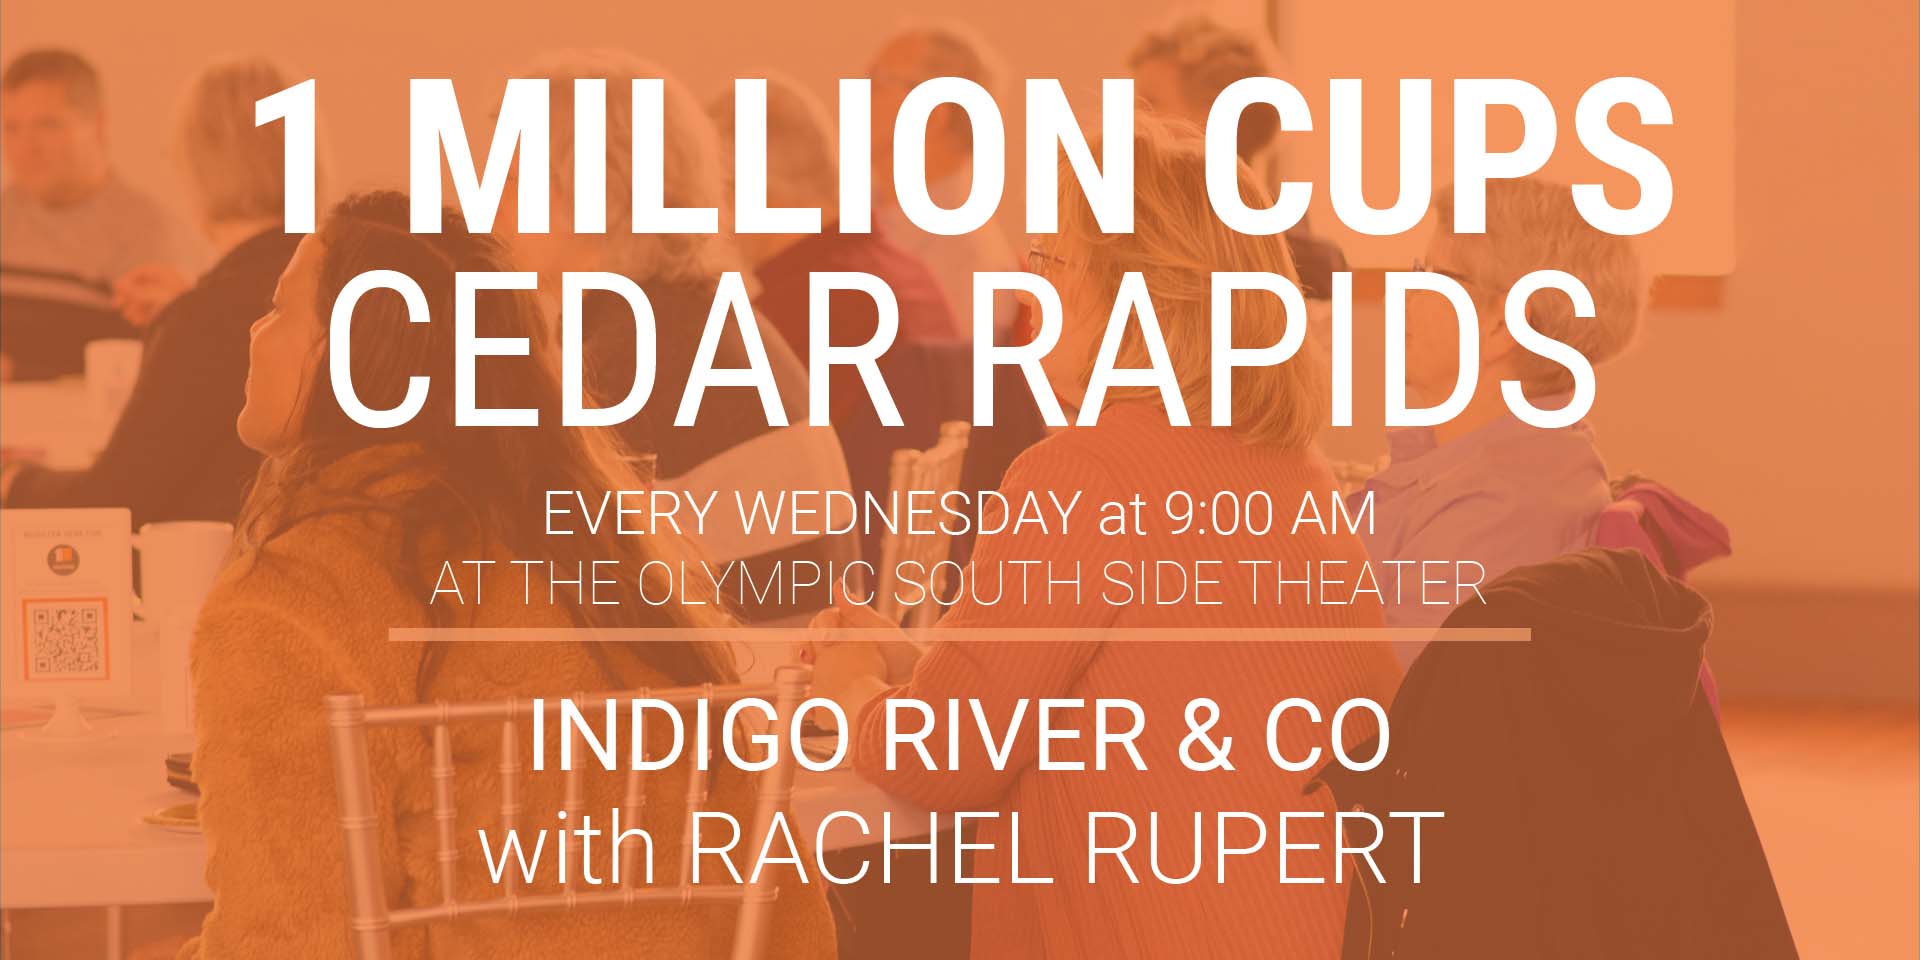 1 Million Cups Cedar Rapids: Indigo River and Co with Rachel Rupert. Every Wednesday at 9AM at Olympic South Side Theater